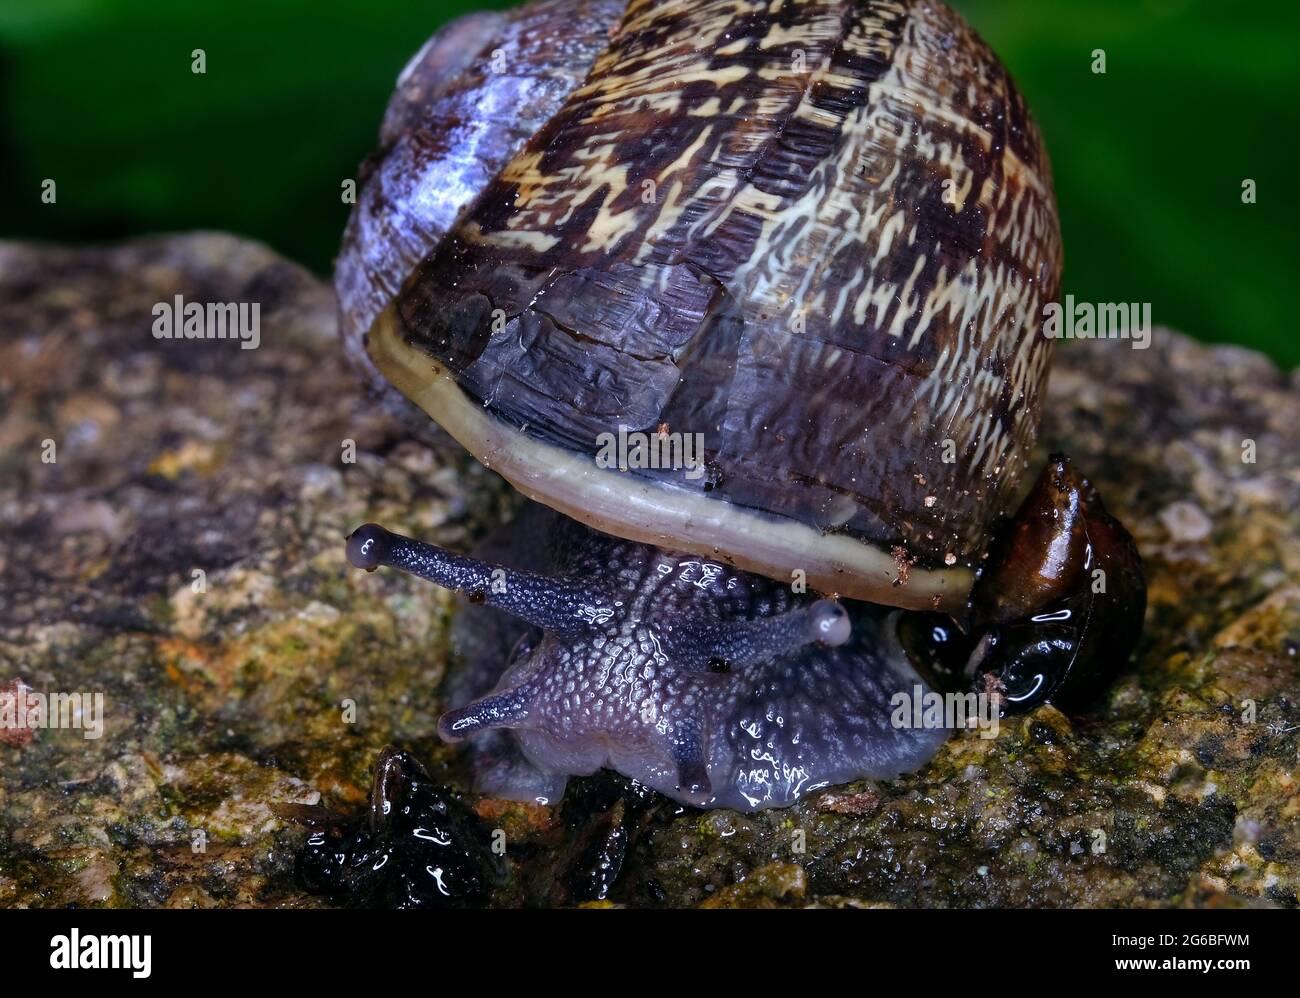 Cornu aspersum, known by the common name garden snail, is a species of land snail in the family Helicidae. Stock Photo